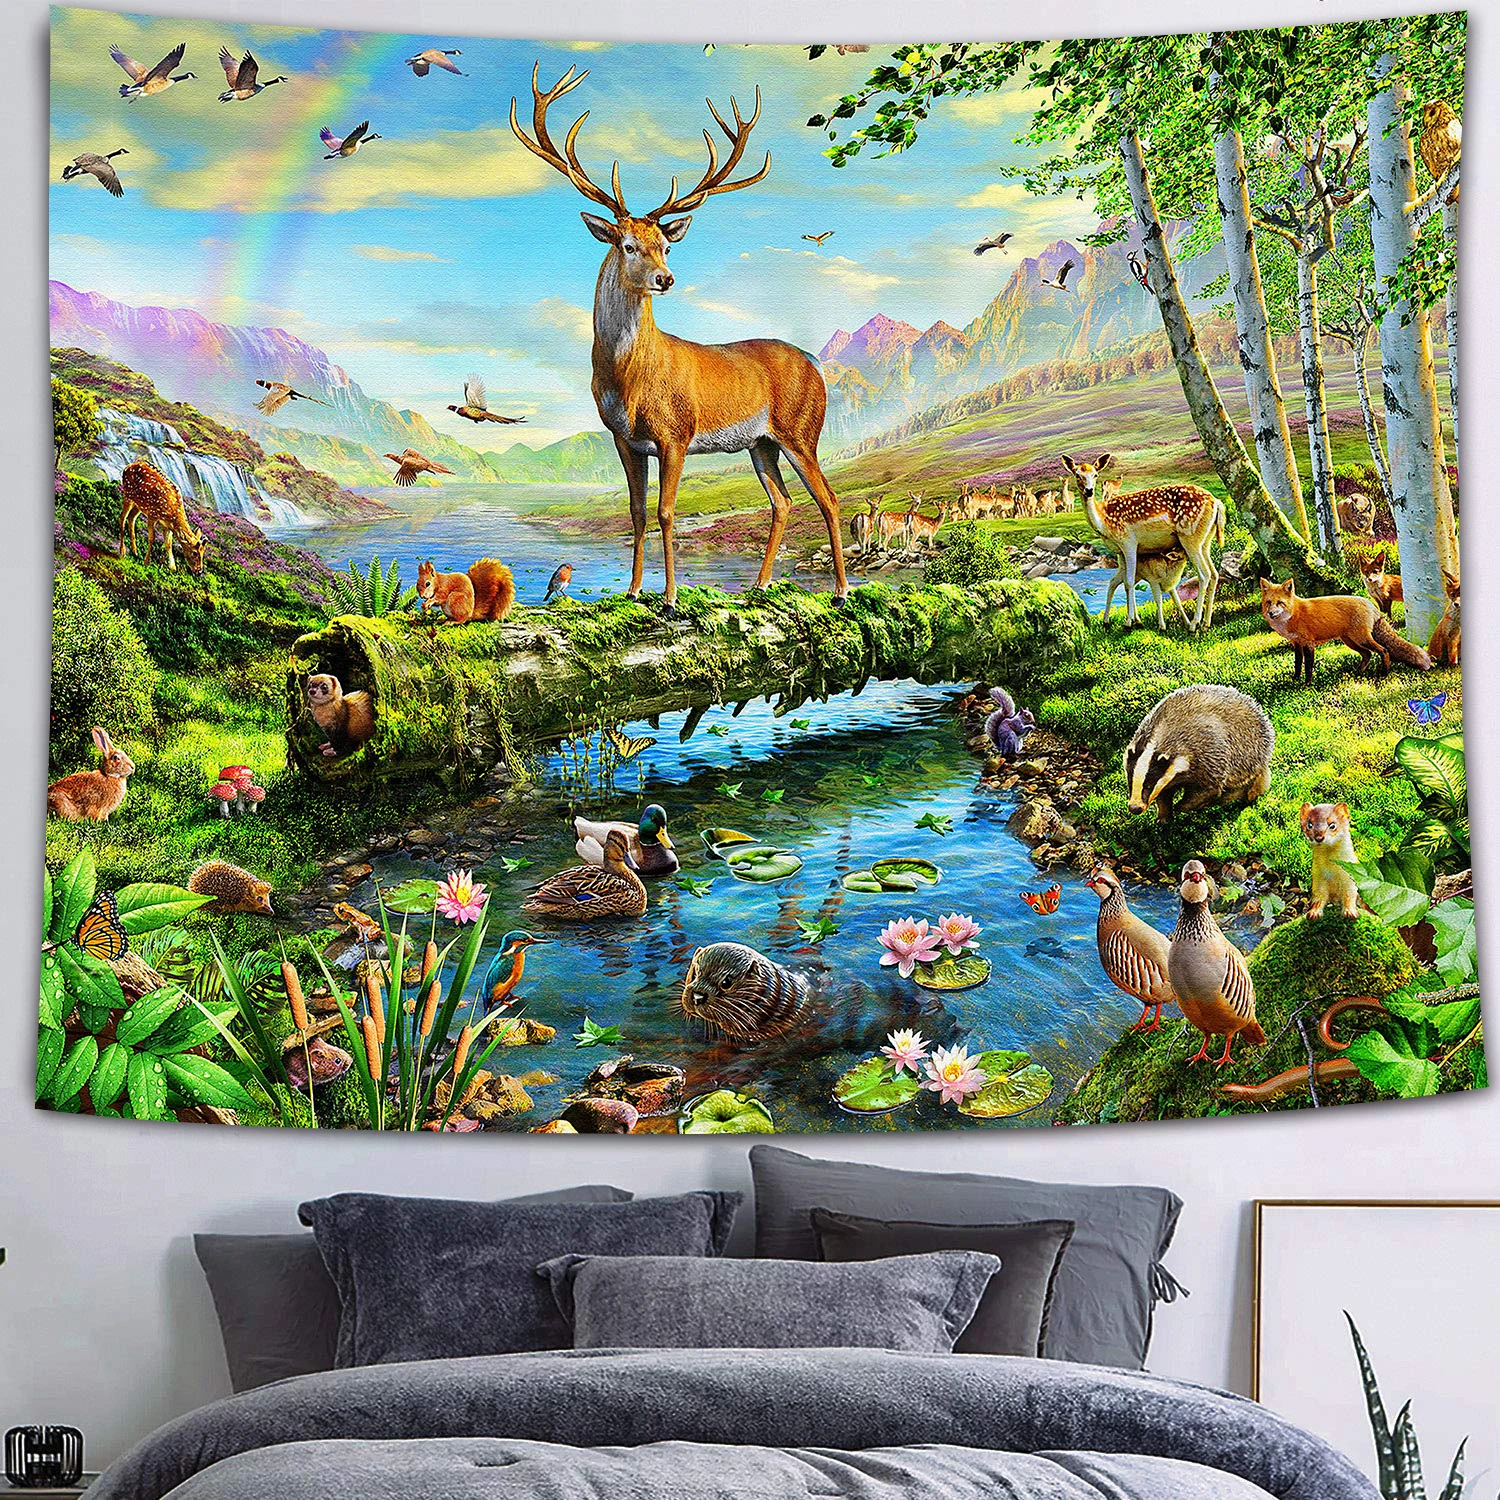 Simsant Wild Animal Tapestry Forest Tiger Deer Parrot Mountain Natural Landscape Wall Hanging Mexican Skull Tapestry for Dorm